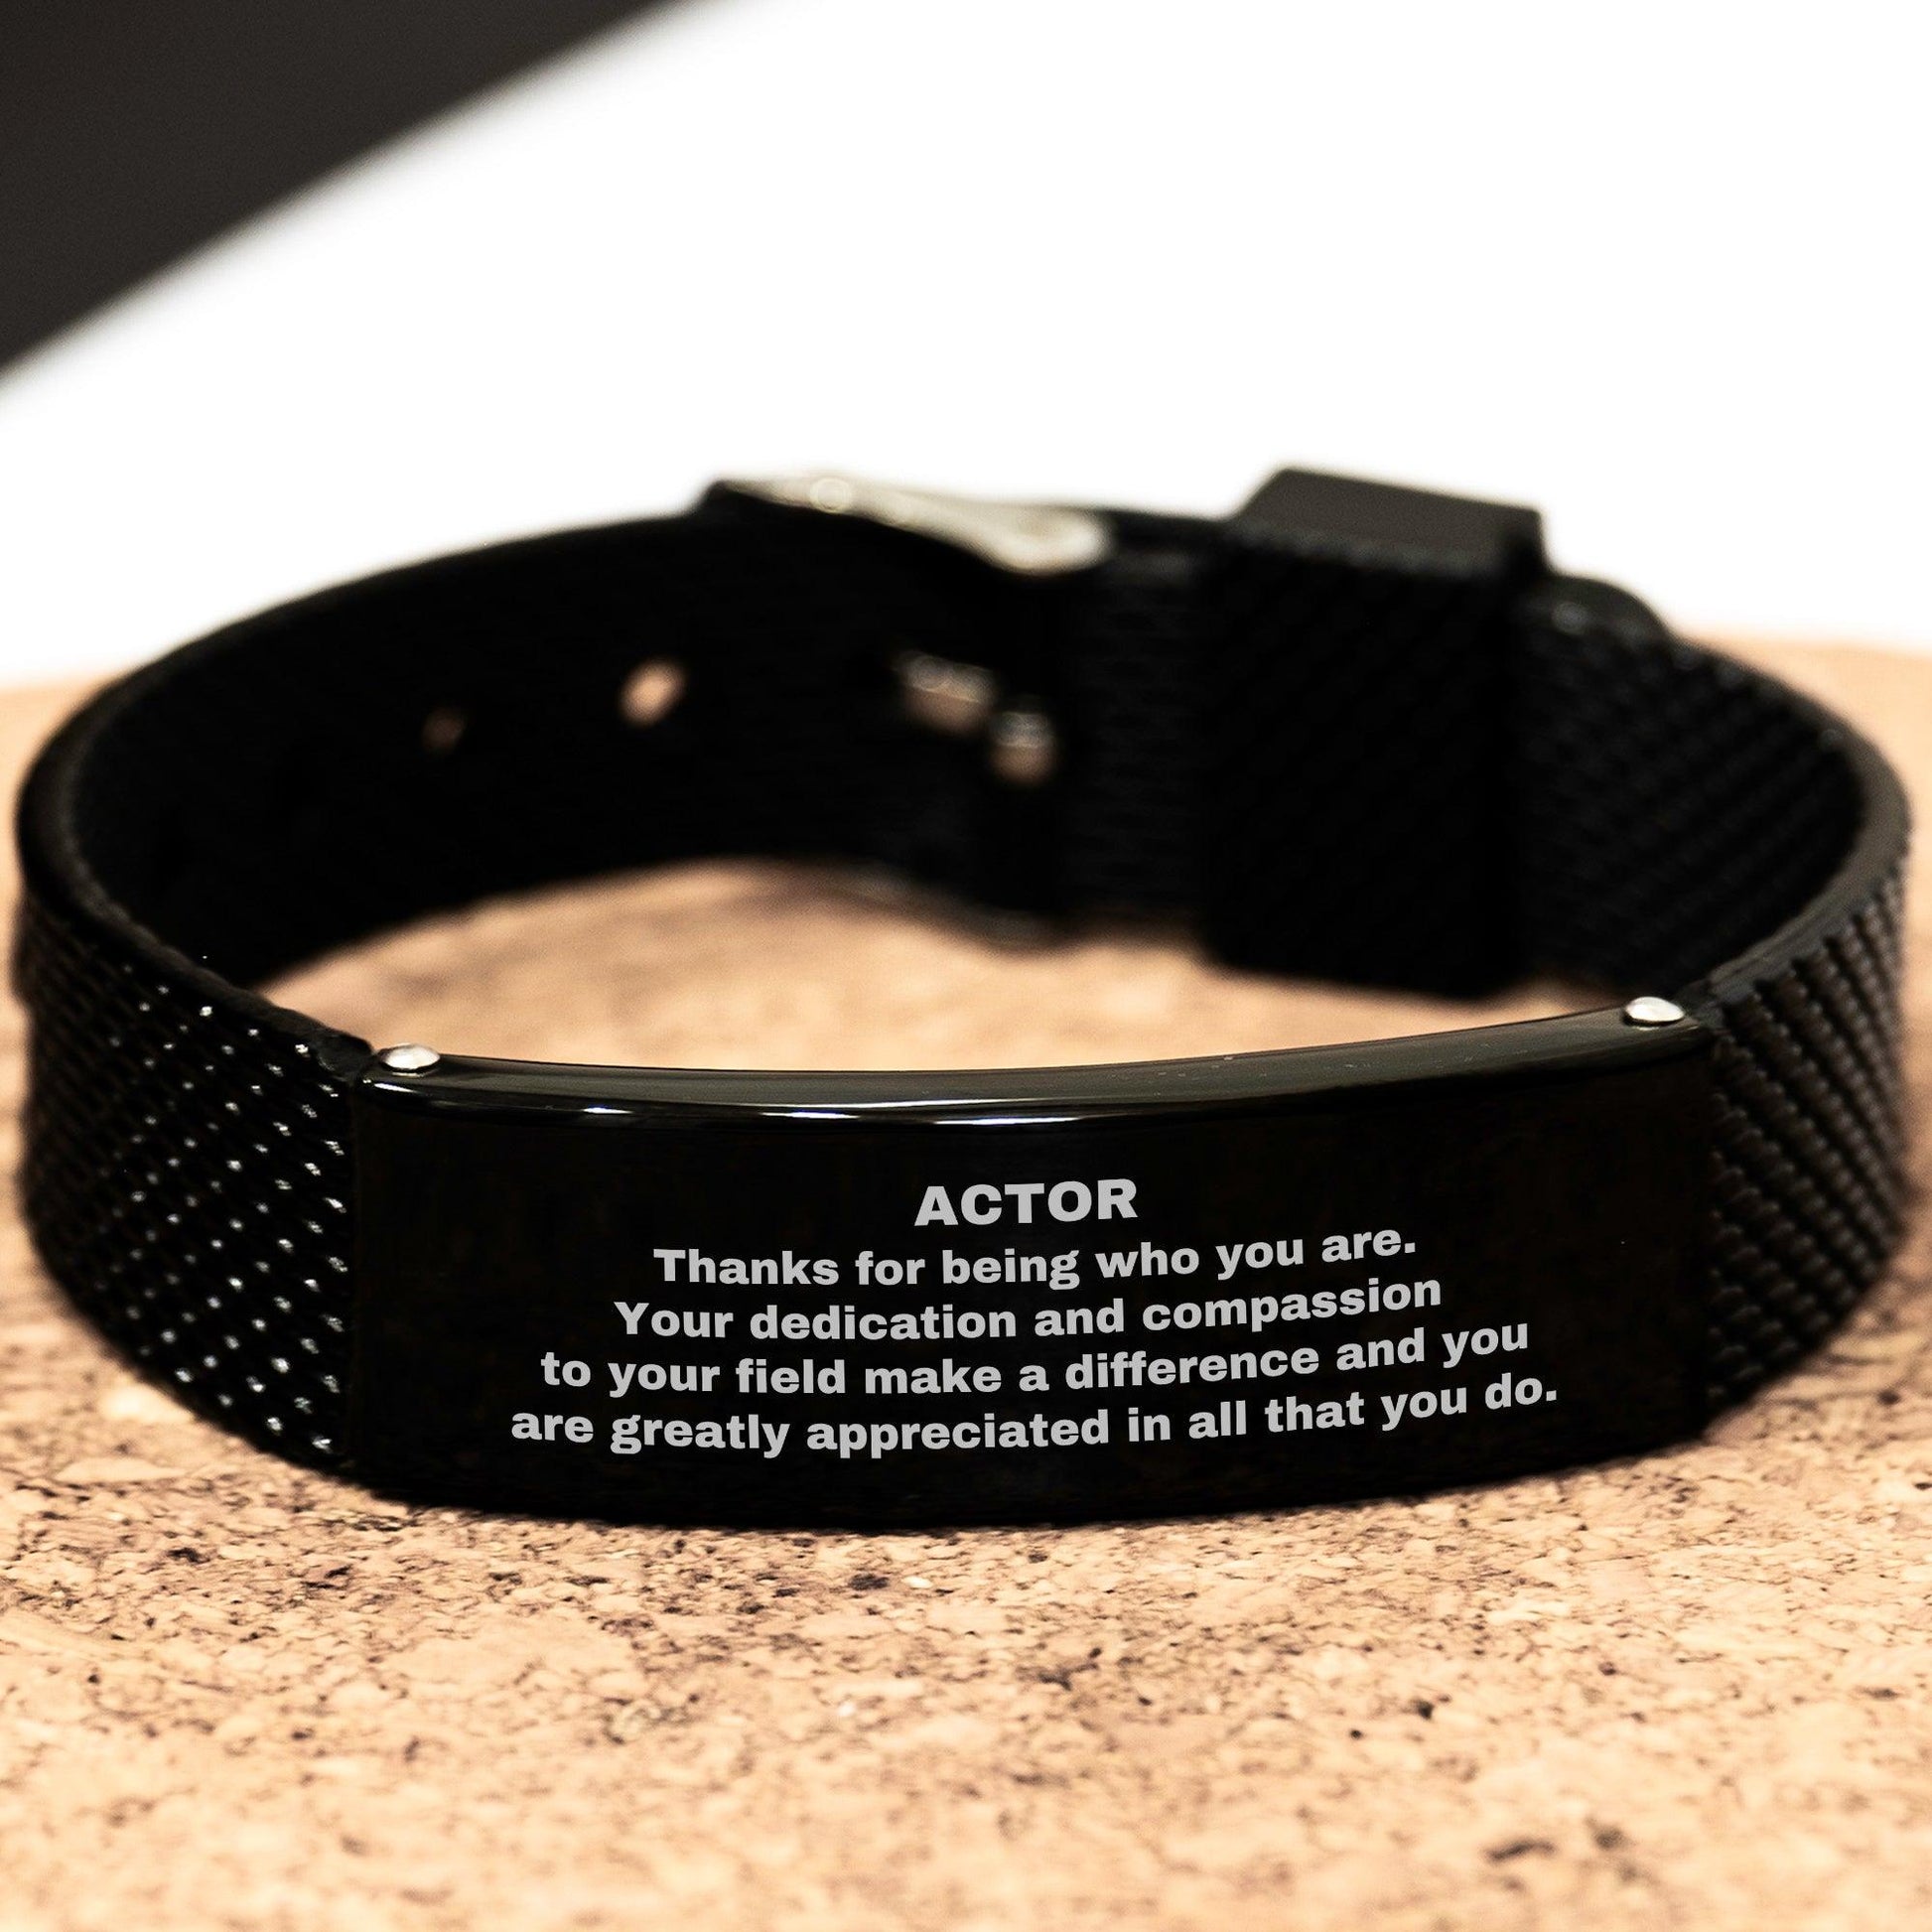 Actor Black Shark Mesh Stainless Steel Engraved Bracelet - Thanks for being who you are - Birthday Christmas Jewelry Gifts Coworkers Colleague Boss - Mallard Moon Gift Shop